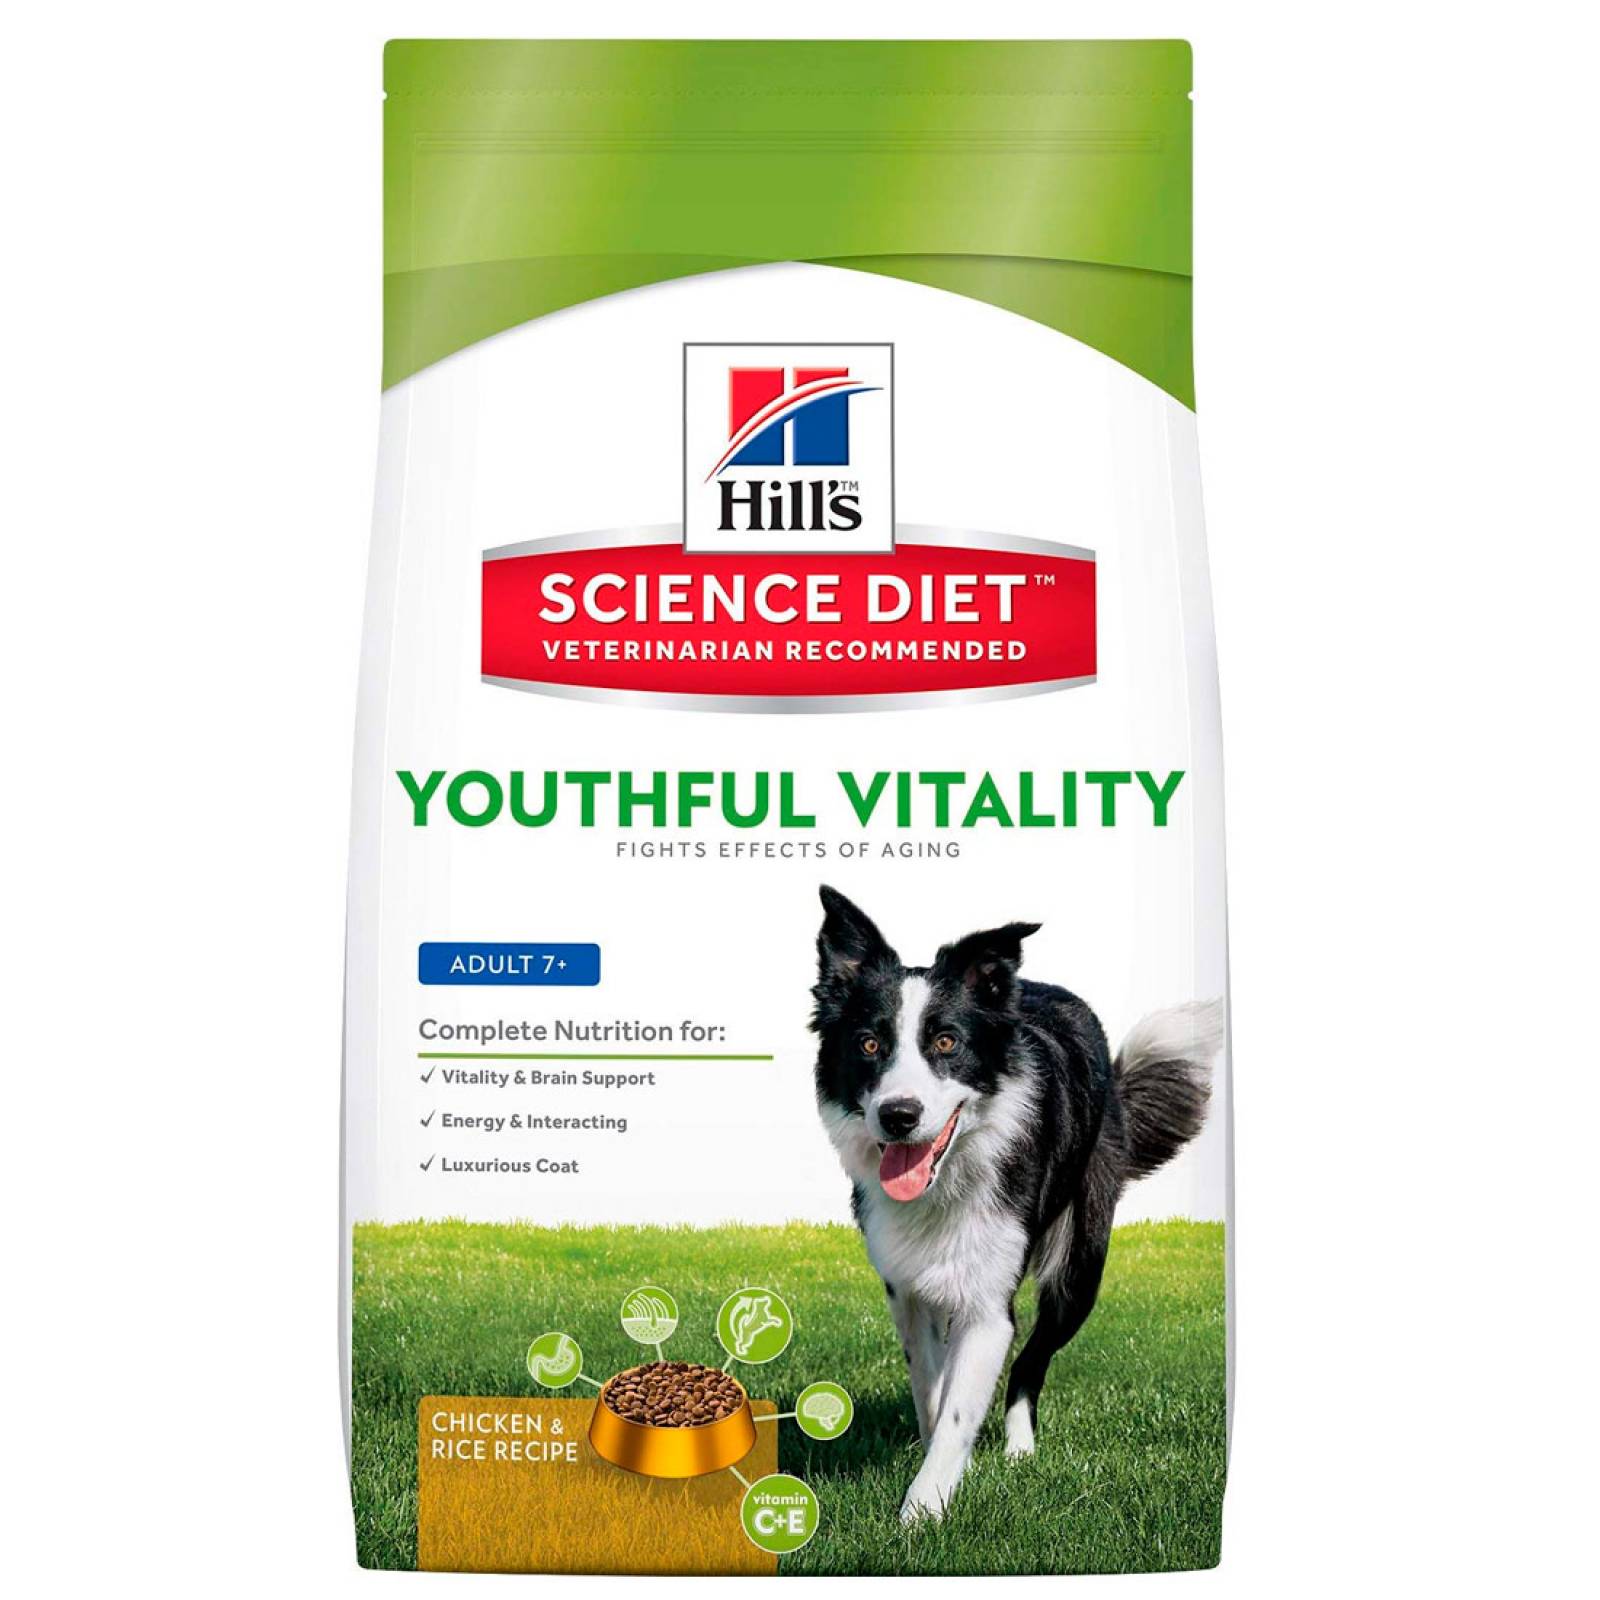 Kit Bulto + 2 Latas Youthful Vitality Hill's Science Diet